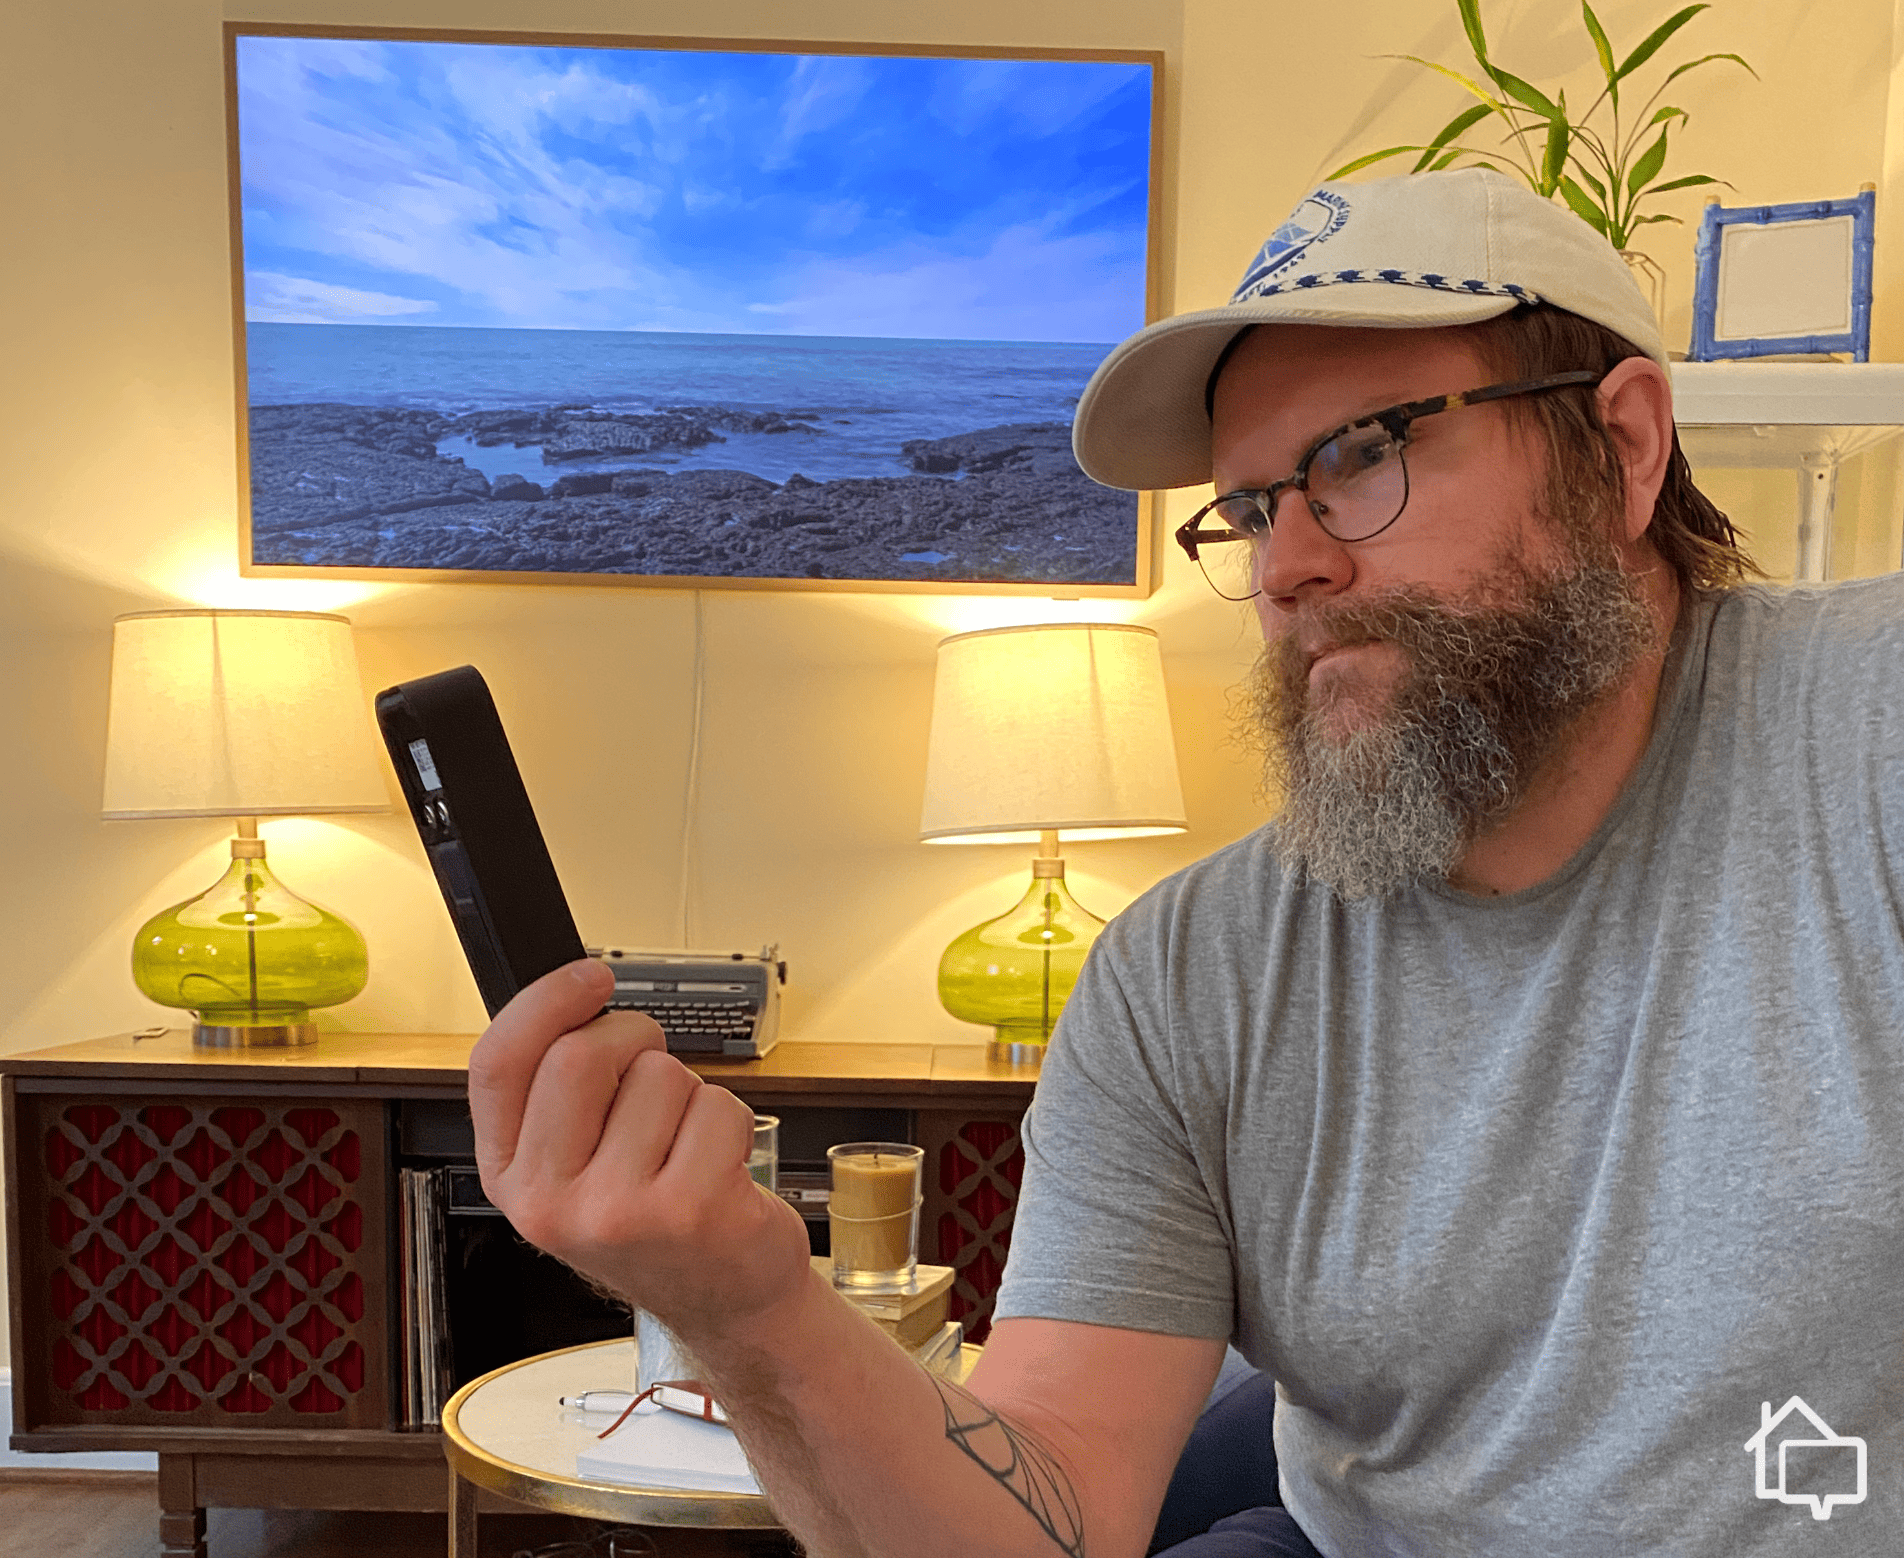 Here I am taking a closer look at the Blink Video Doorbell